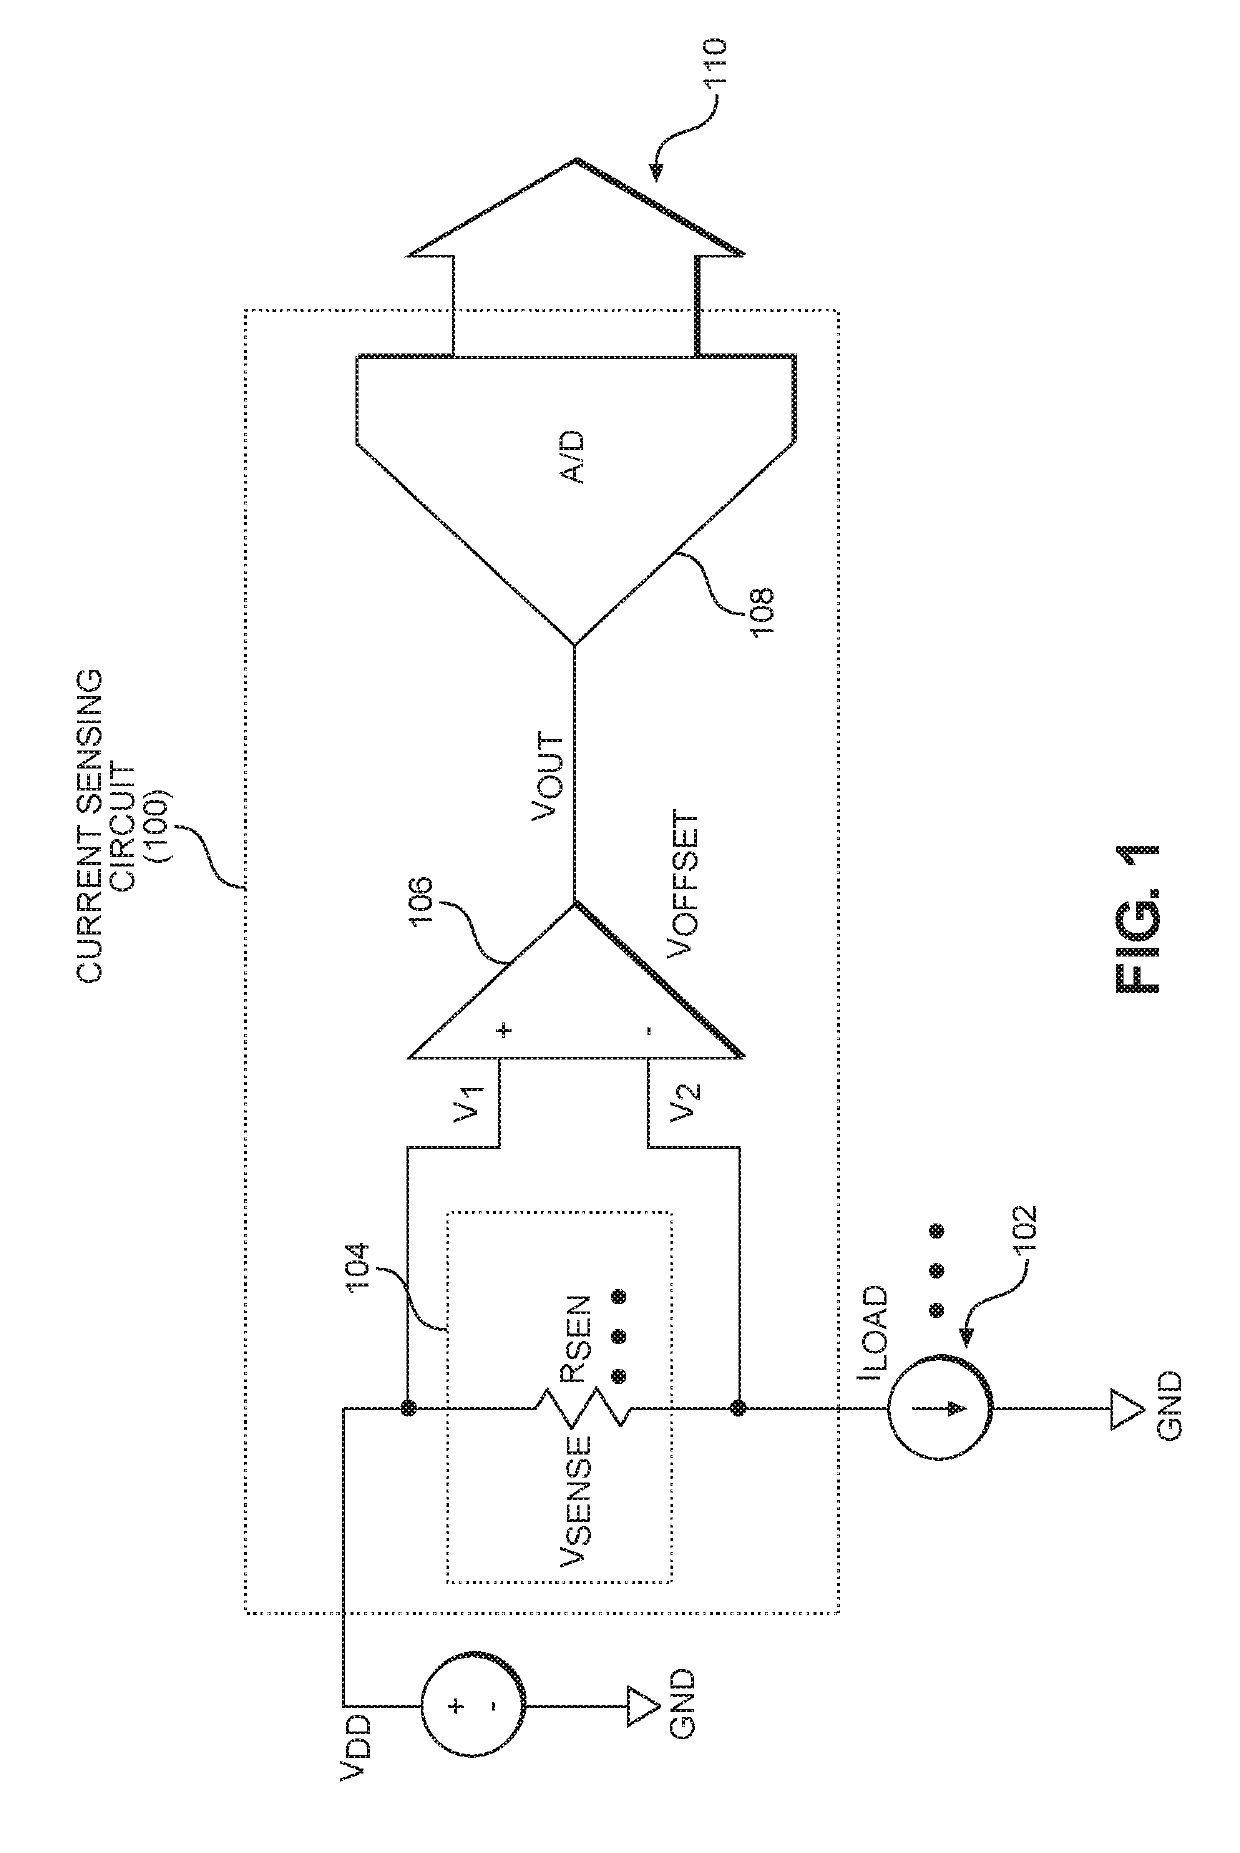 Single controller automatic calibrating circuits for reducing or canceling offset voltages in operational amplifiers in an instrumentation amplifier